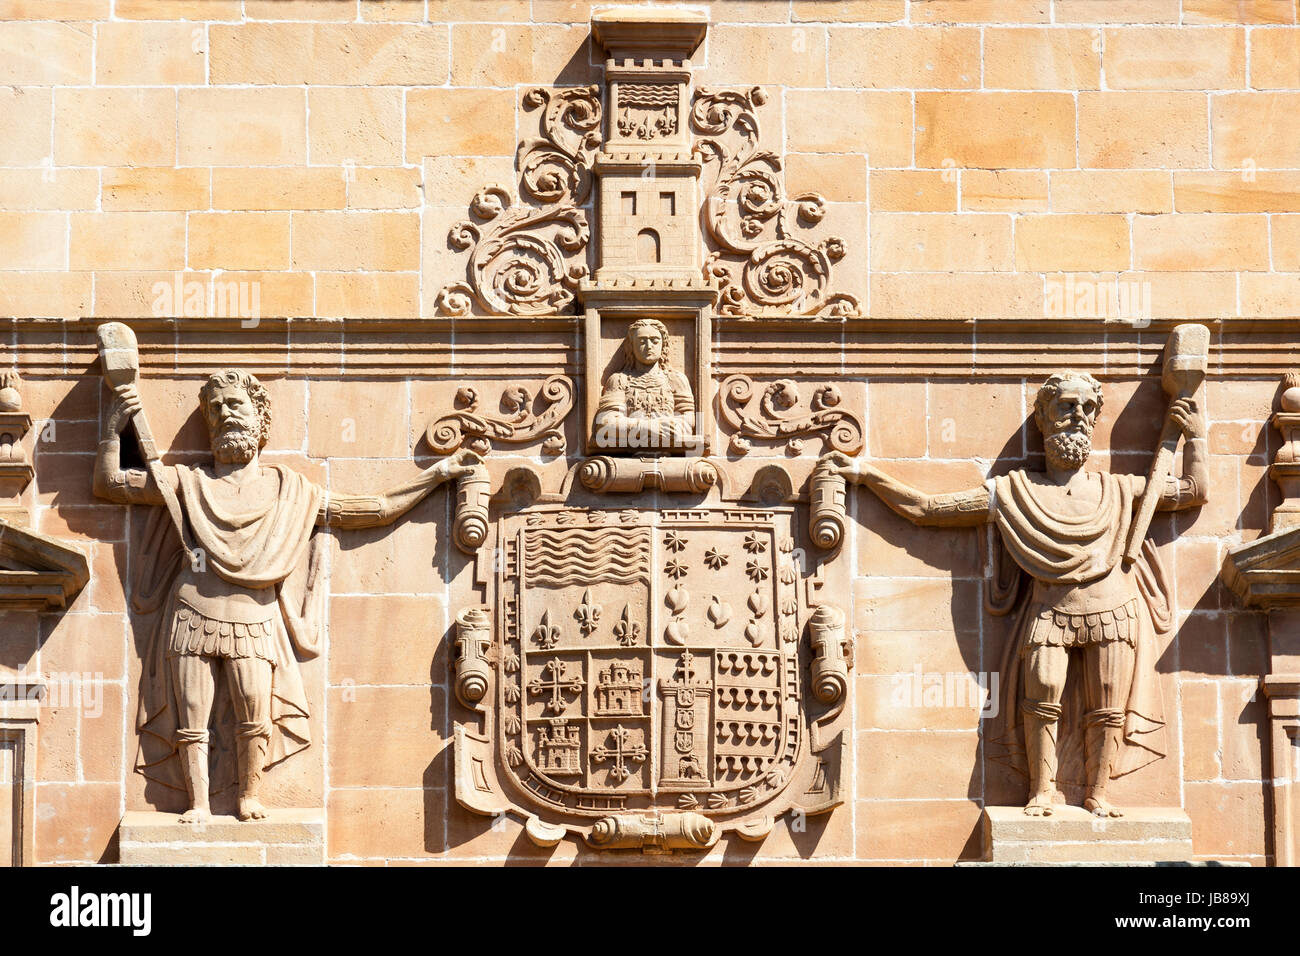 Old coat of arms made by stone Stock Photo